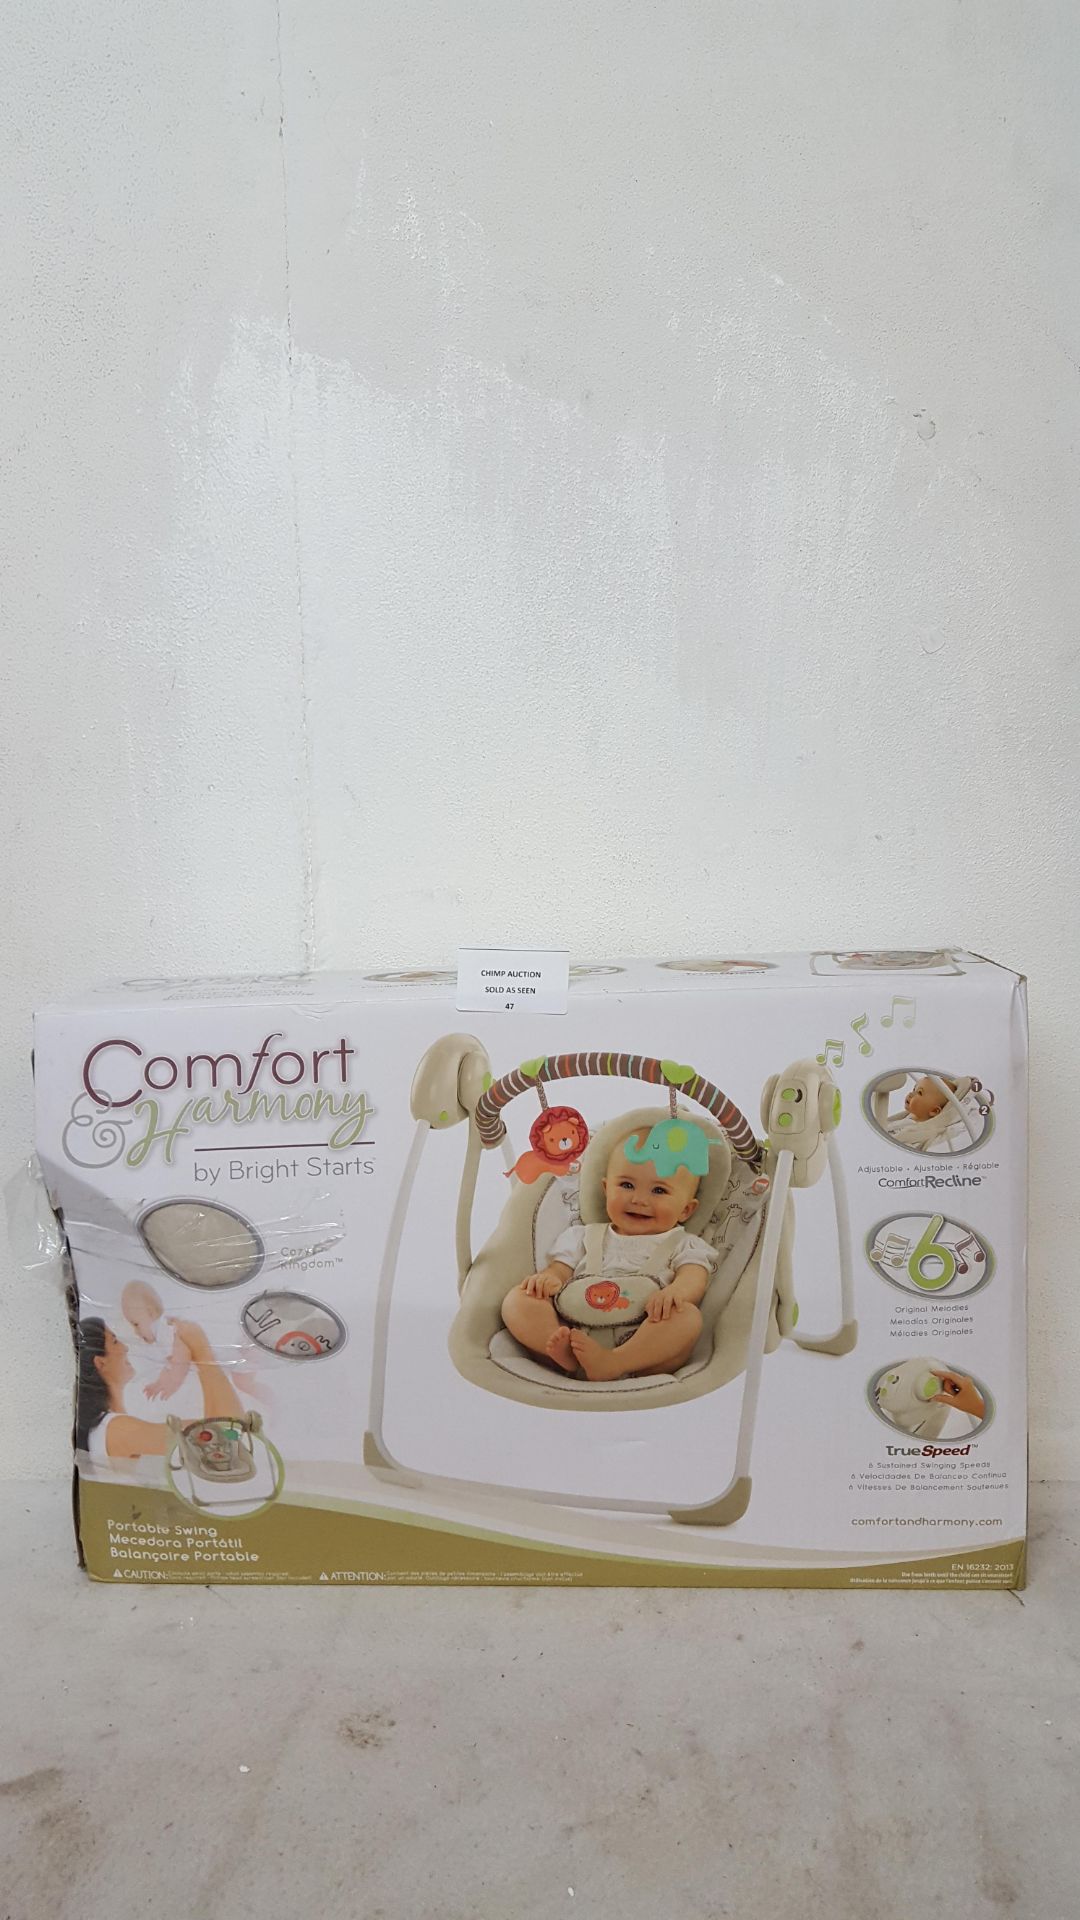 COMFORT & HARMONY BY BRIGHT STARTS PORTABLE BABY SWING /